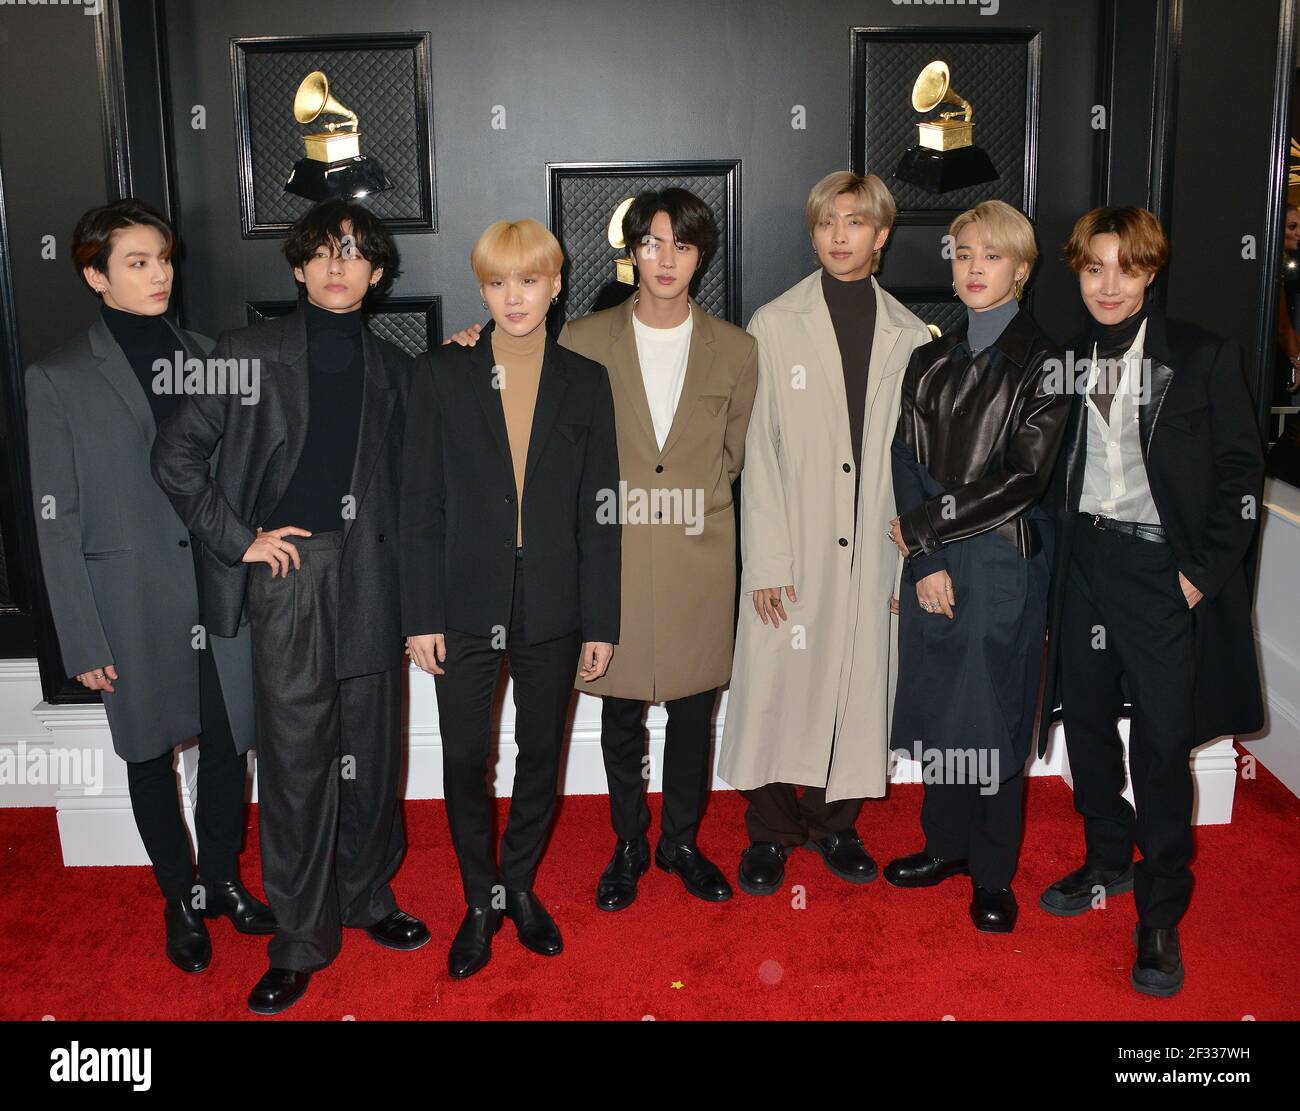 RM, V, Suga, Jin, Jimin, Jungkook, and J-Hope of music group BTS 107 attends the 62nd Annual GRAMMY Awards at Staples Center on January 26, 2020 in Los Angeles, California Stock Photo